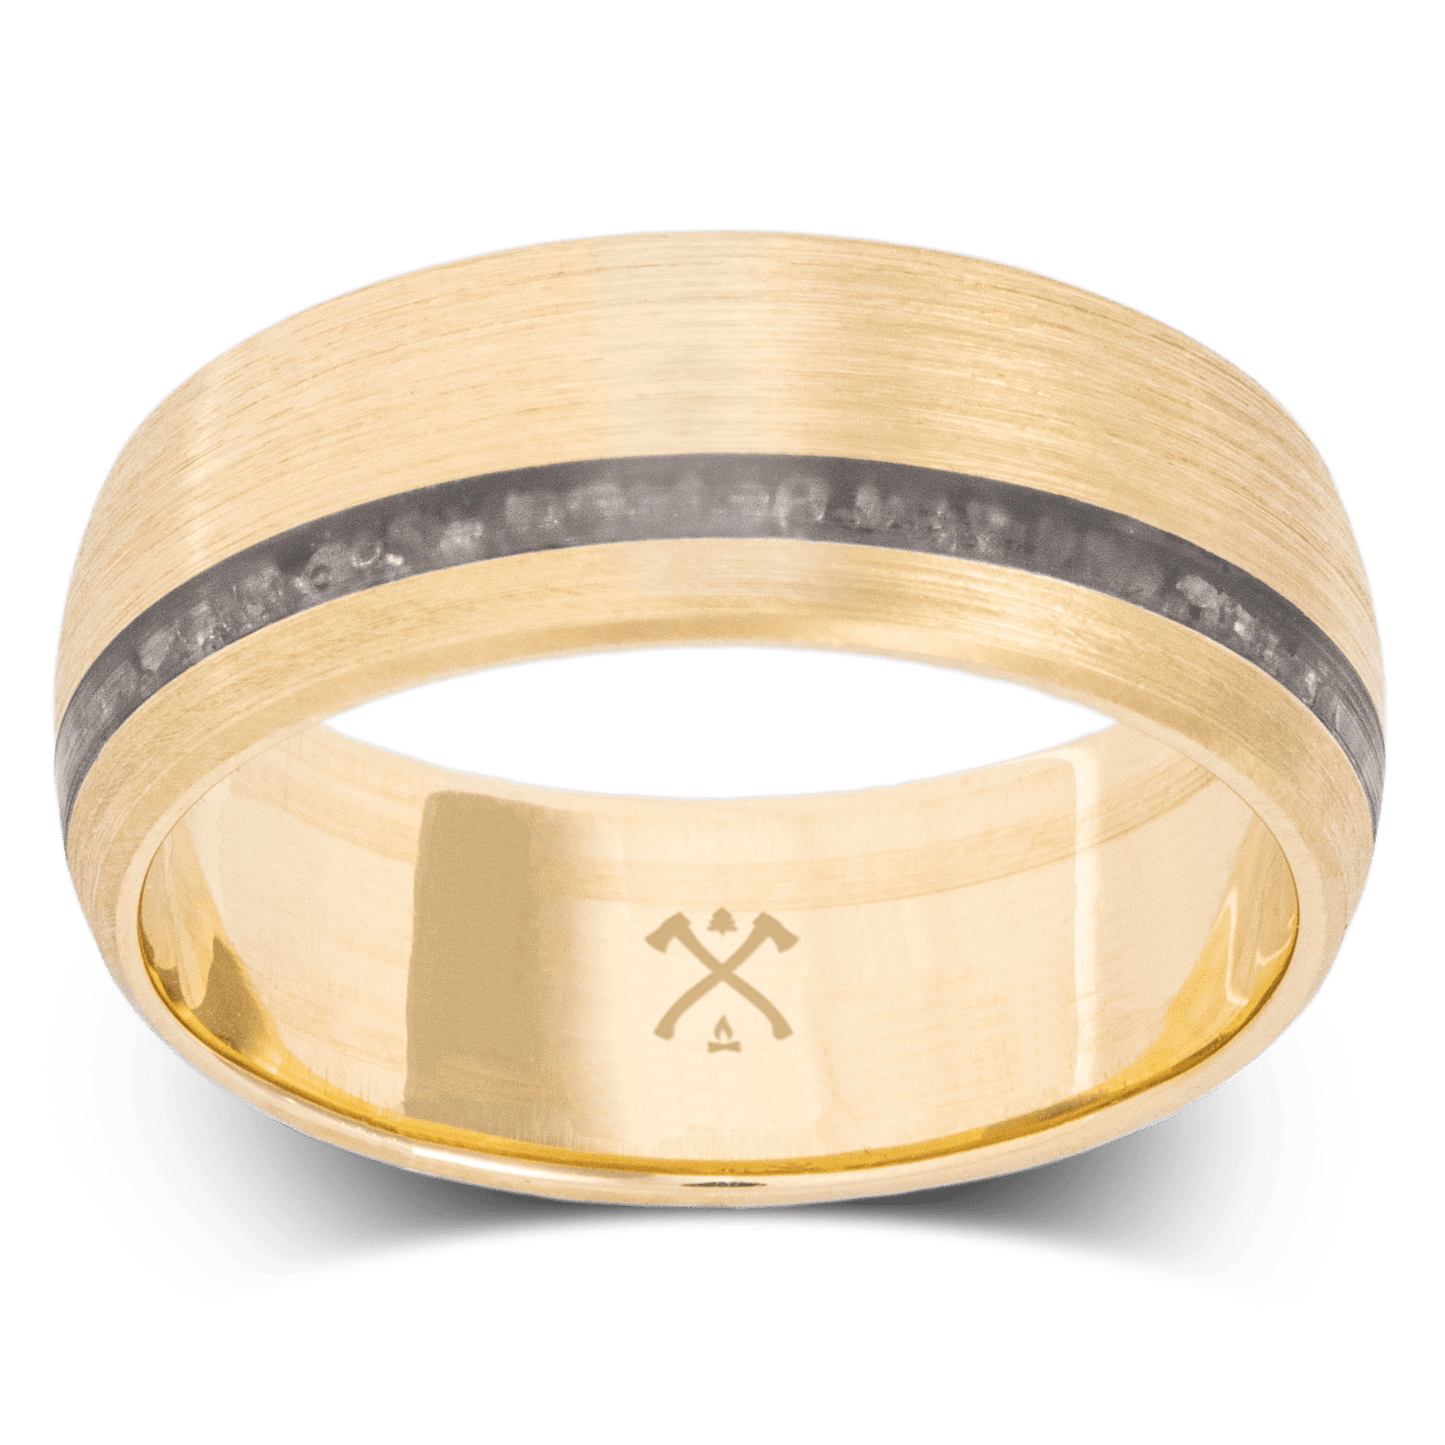 The Zeus - Men's Wedding Rings - Manly Bands